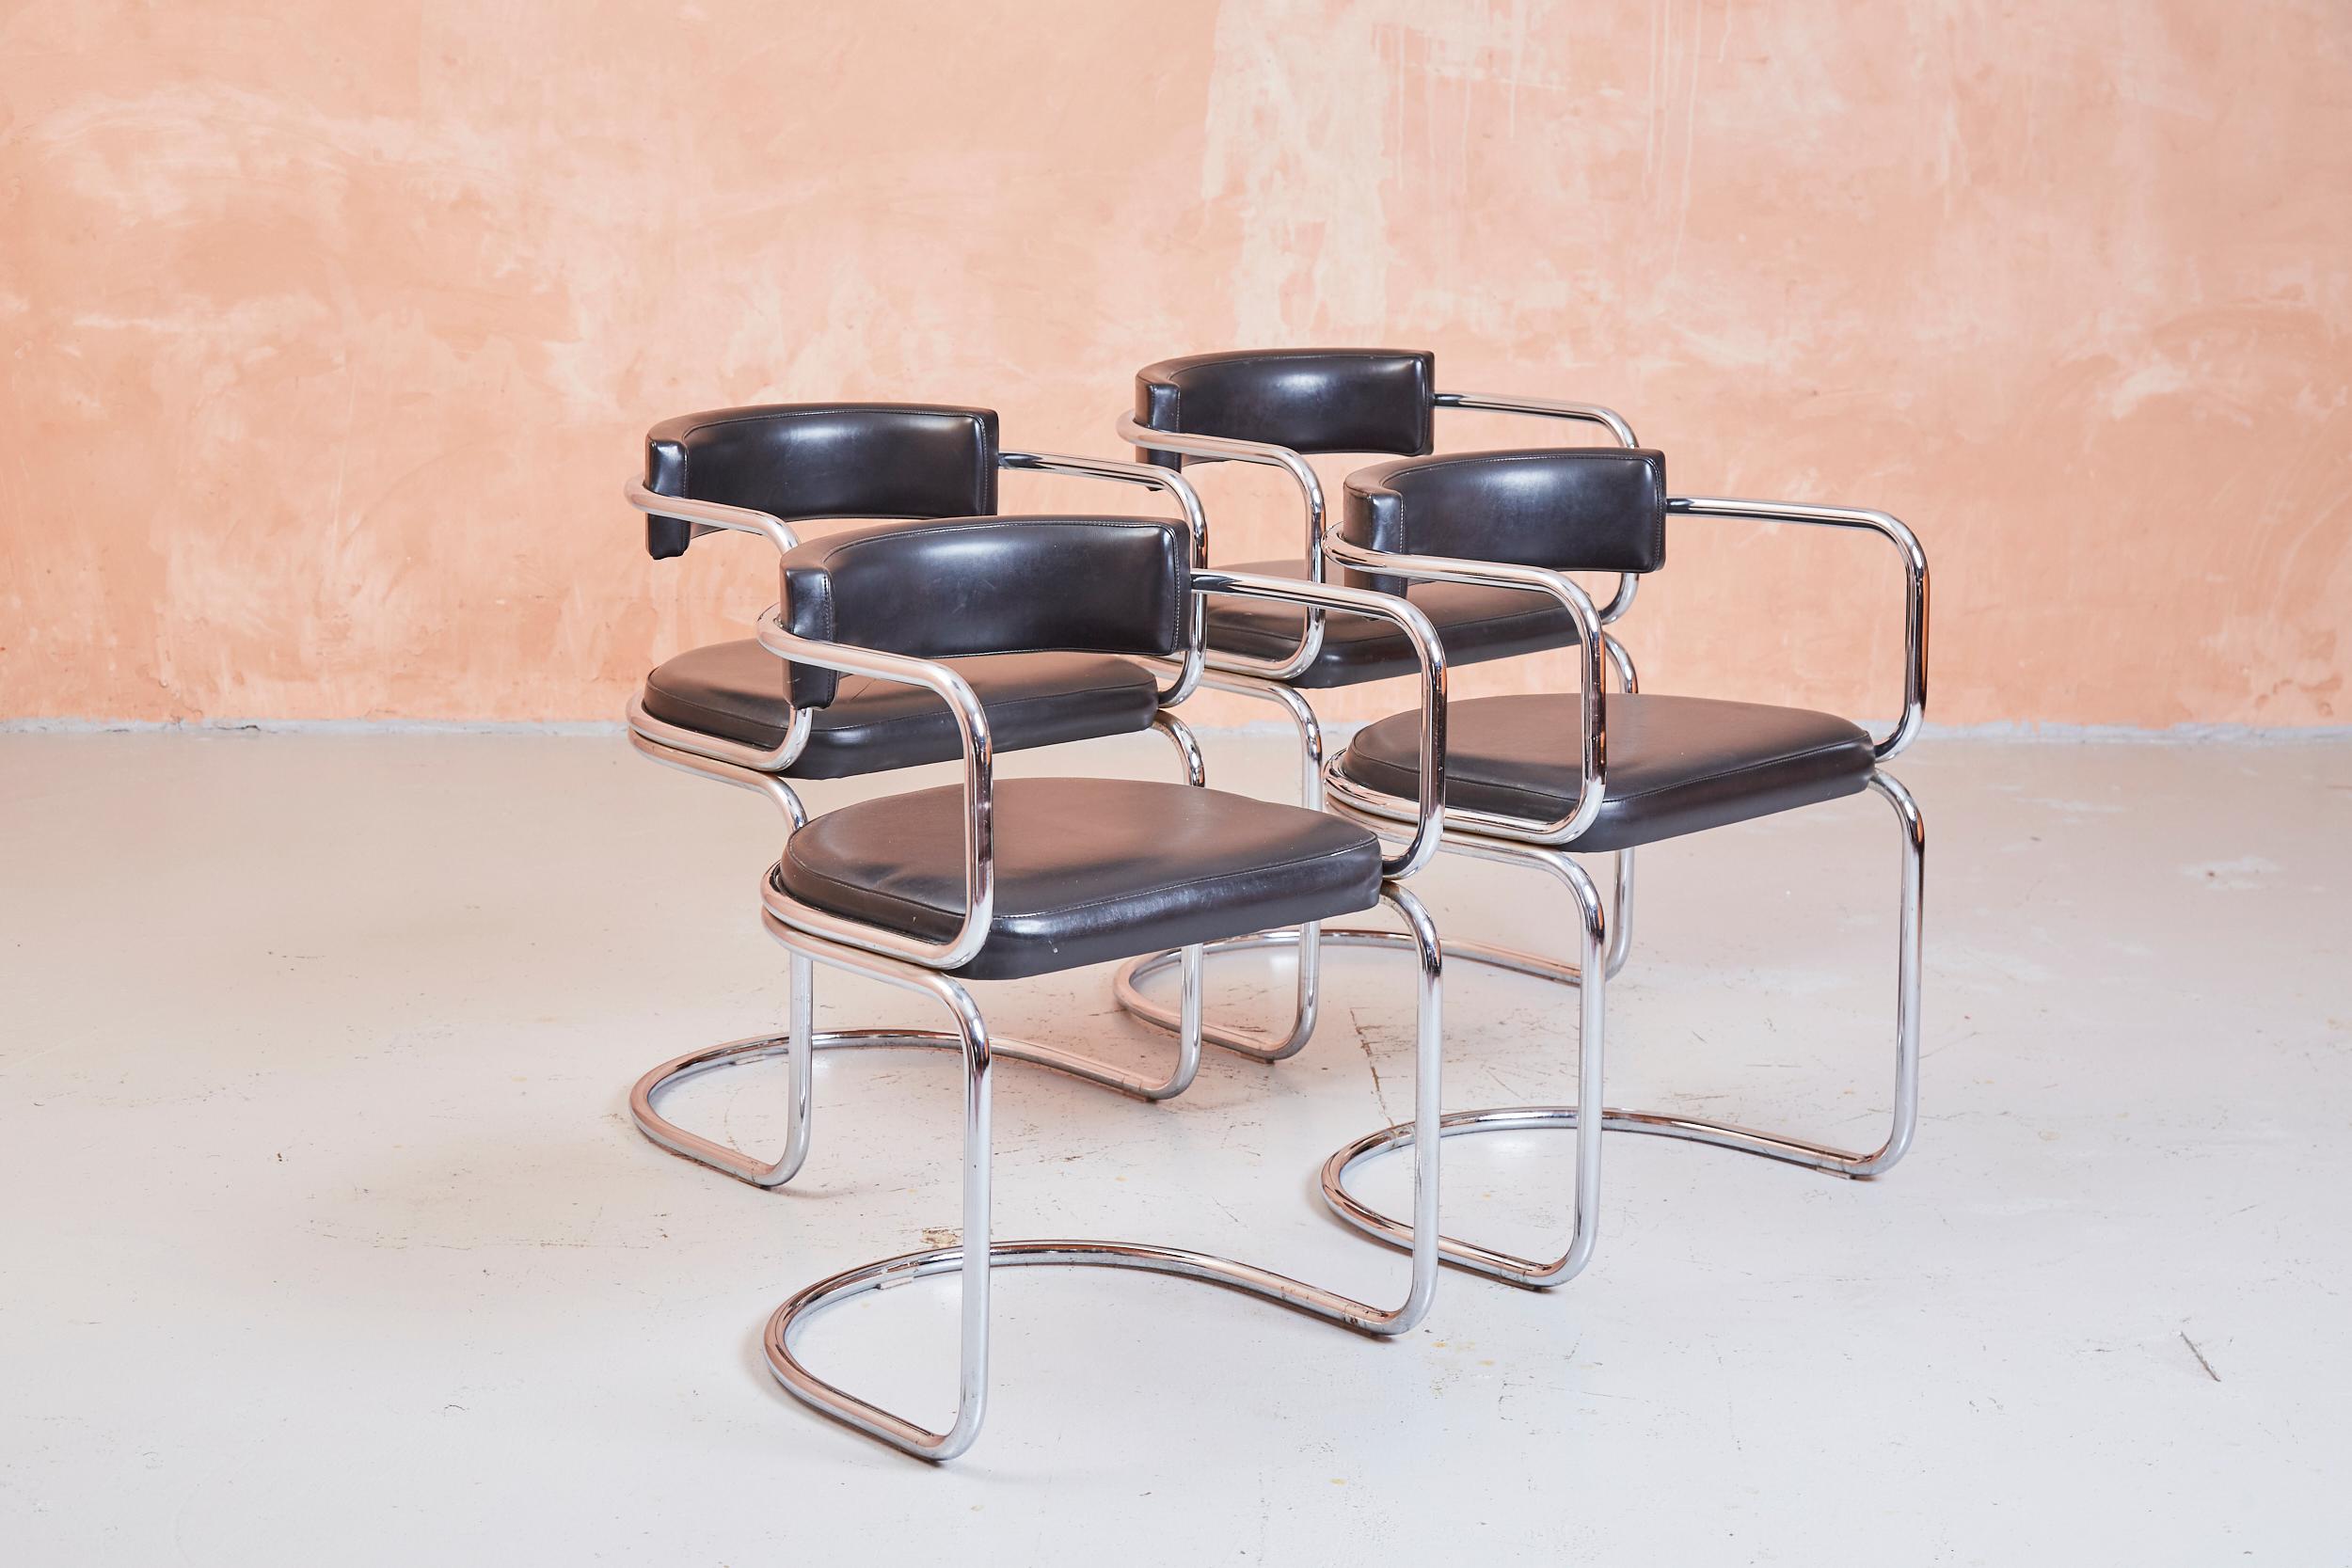 A set of four tubular framed cantilever chairs upholstered in black leatherette.

While missing any attribution marks they appear to be very fine examples of the iconic Swiss modernist chairs by Zougoise Victoria.